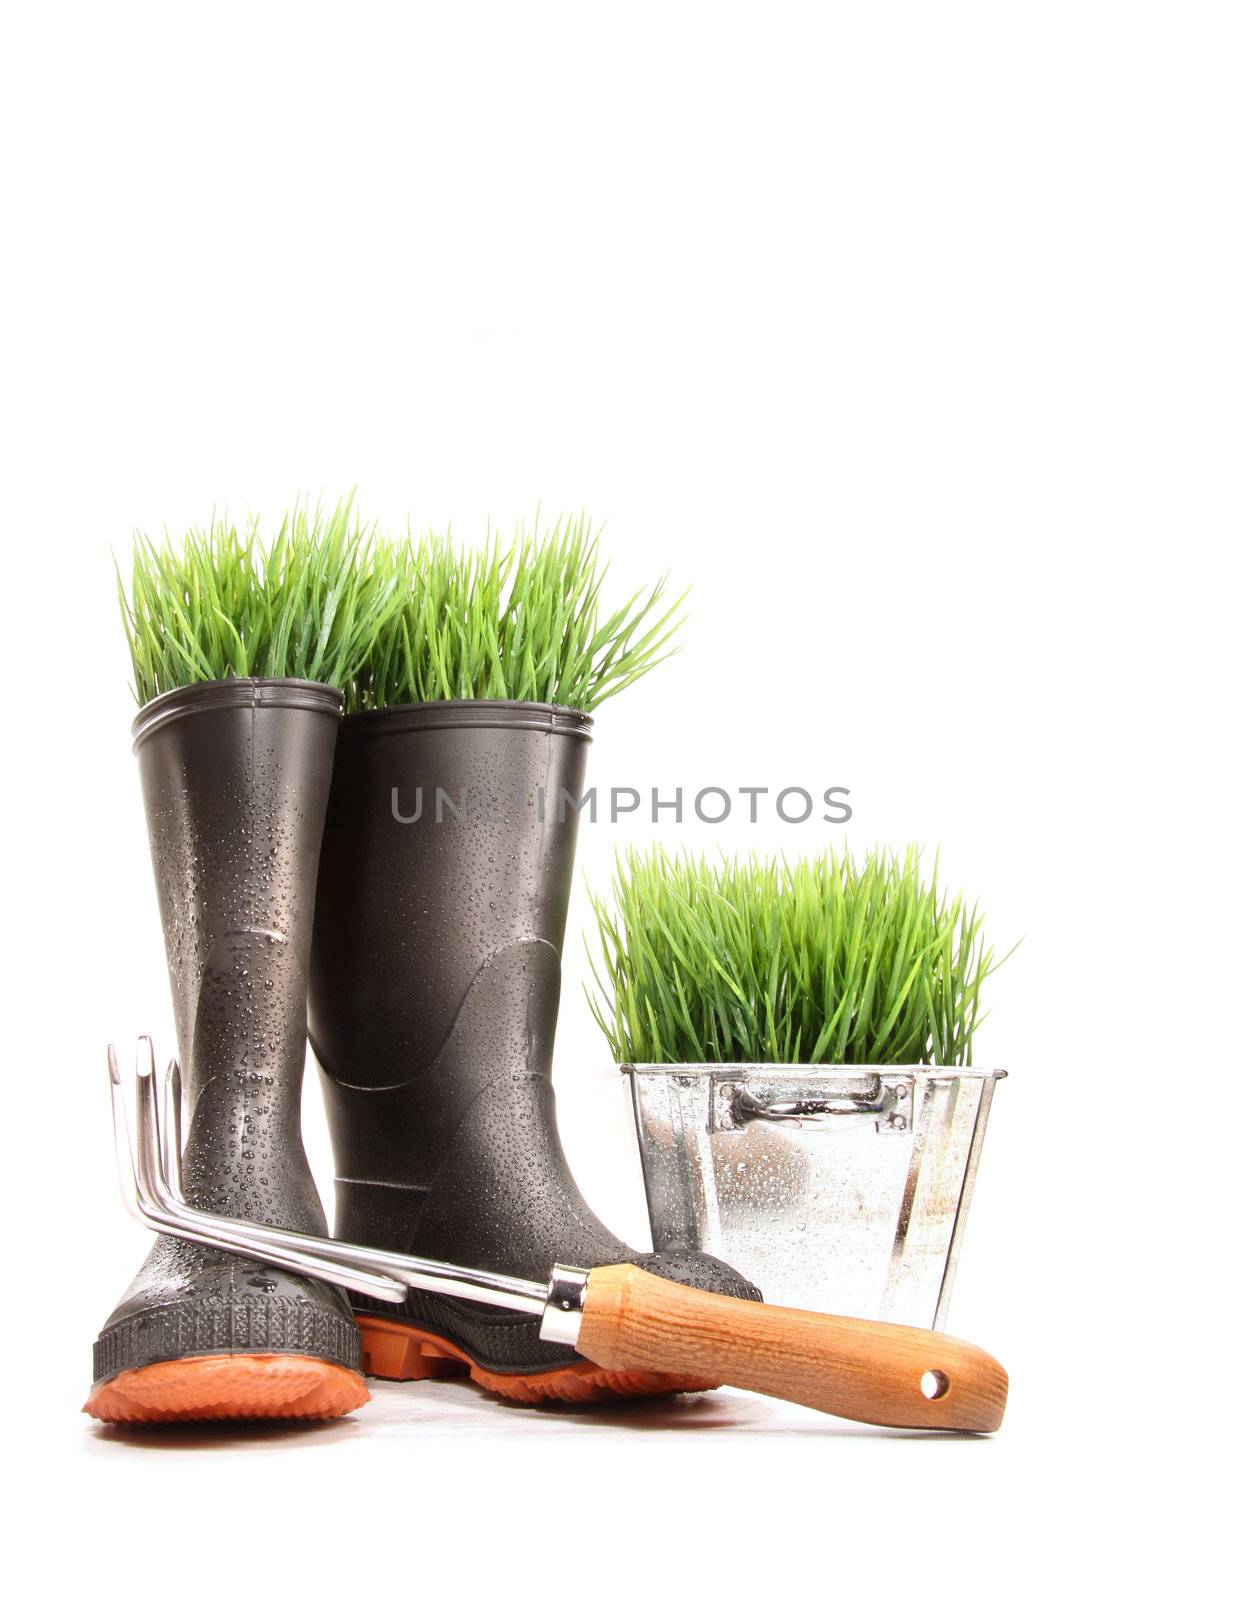 Rubber boots with grass in pot and tool on white